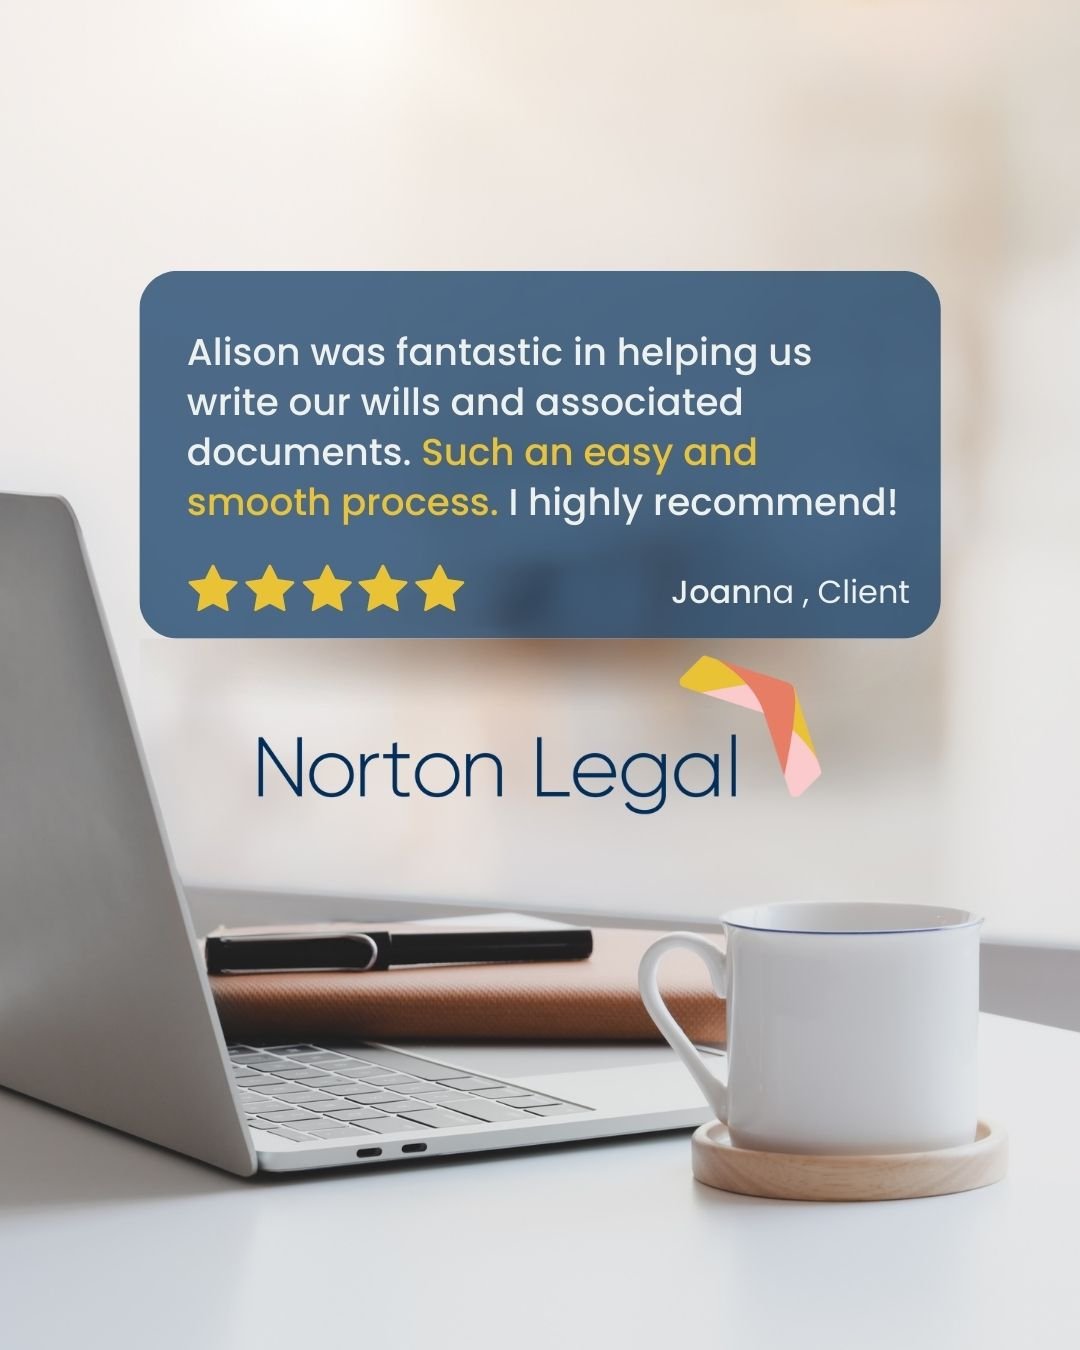 🌟 We're thrilled to receive such high praise for Alison's exceptional service in will drafting. 

Thanks so much Joanna. Your satisfaction is our top priority, and we're delighted to hear that the process was seamless.

If you or anyone you know nee